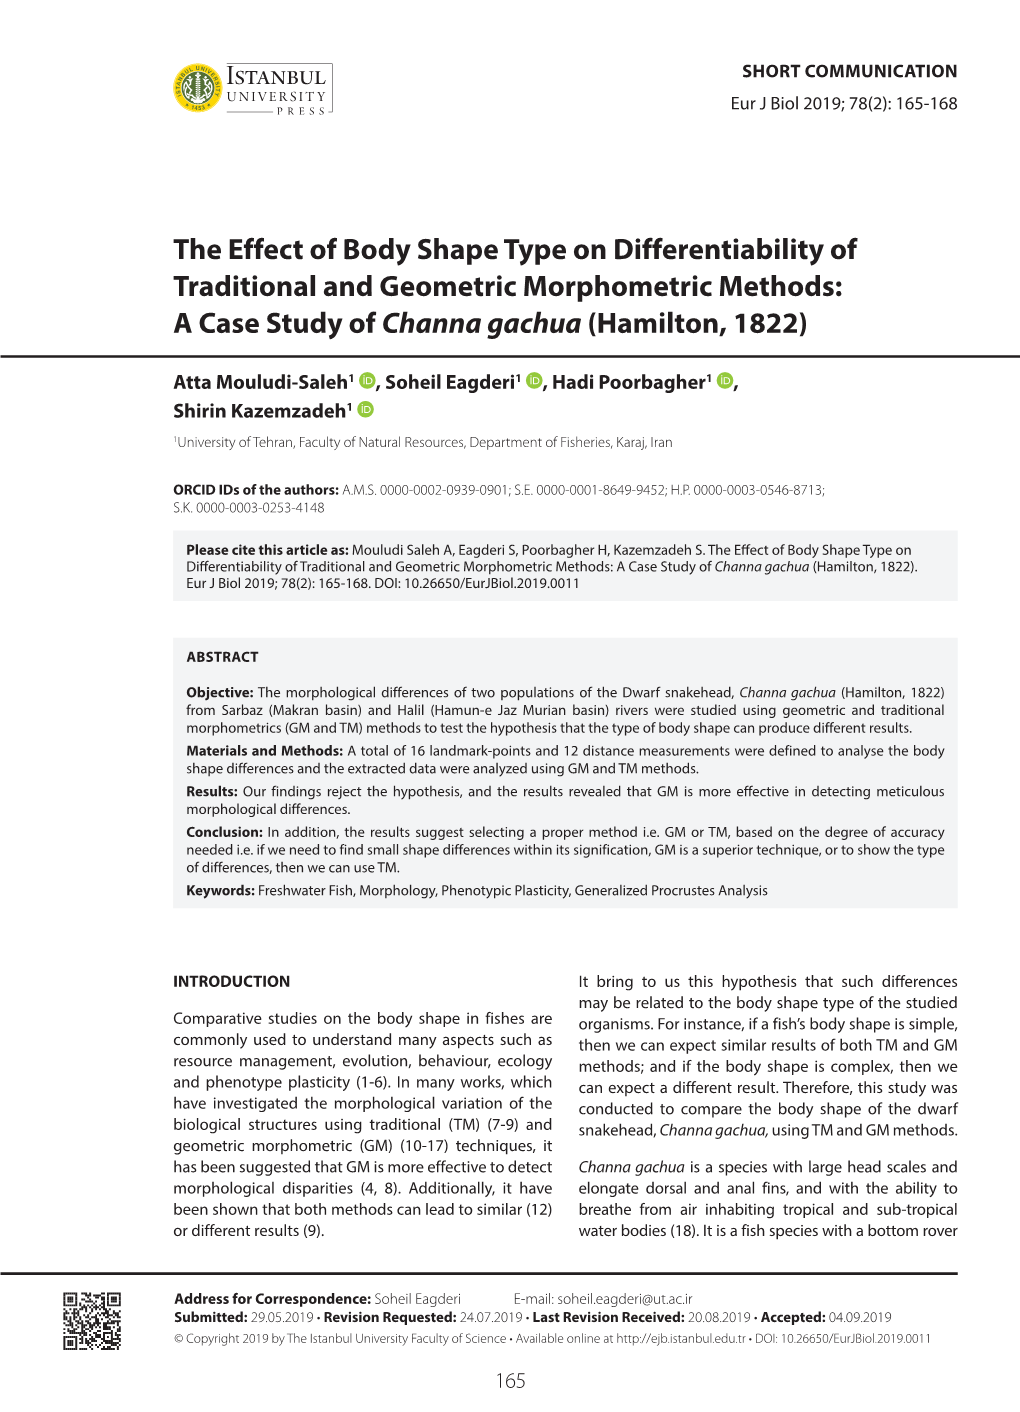 The Effect of Body Shape Type on Differentiability of Traditional and Geometric Morphometric Methods: a Case Study of Channa Gachua (Hamilton, 1822)